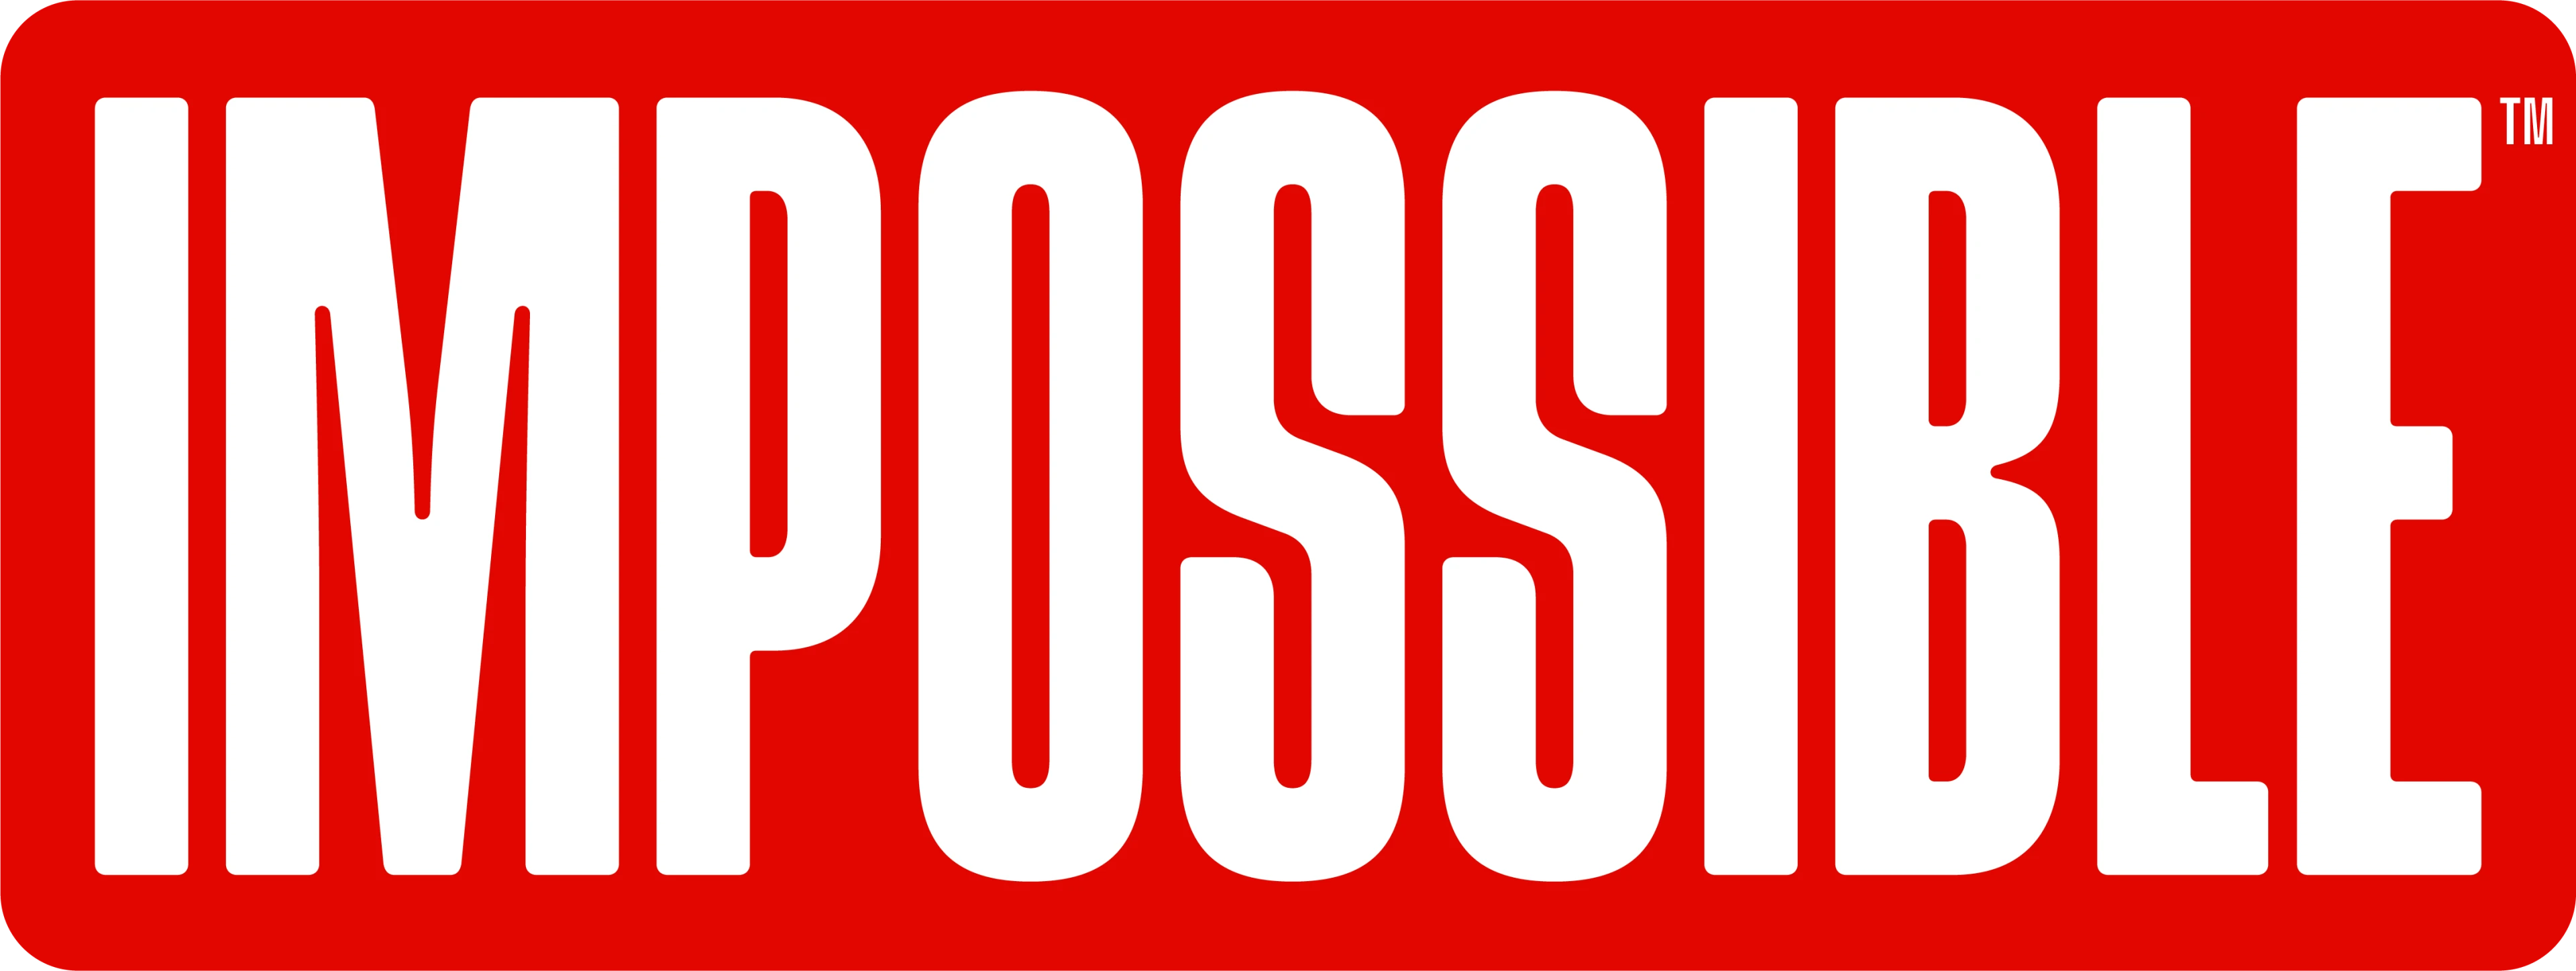 New rebranded Impossible logo